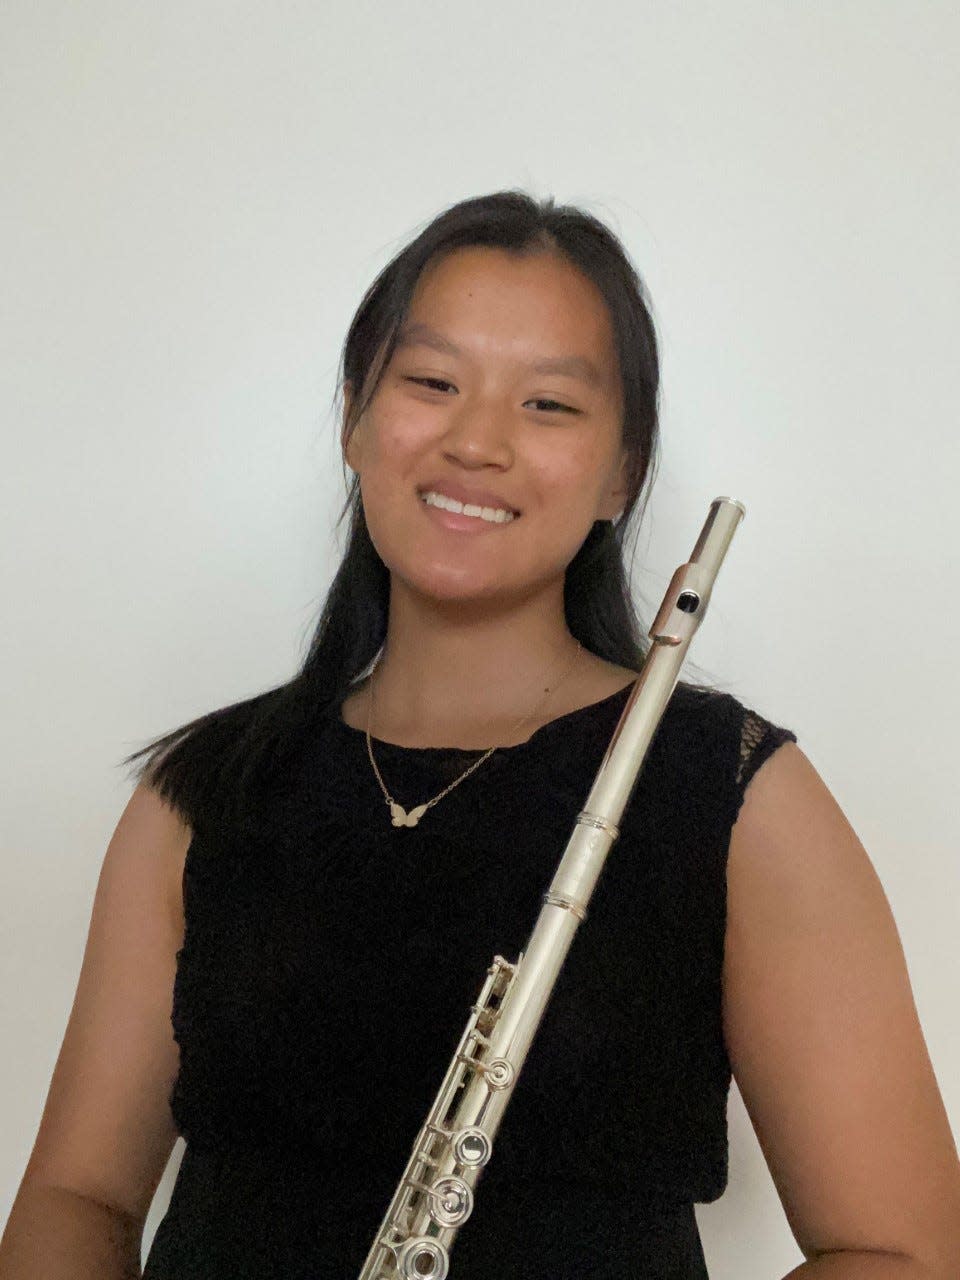 Rena Xu, Youth Orchestra of Bucks County competition winner